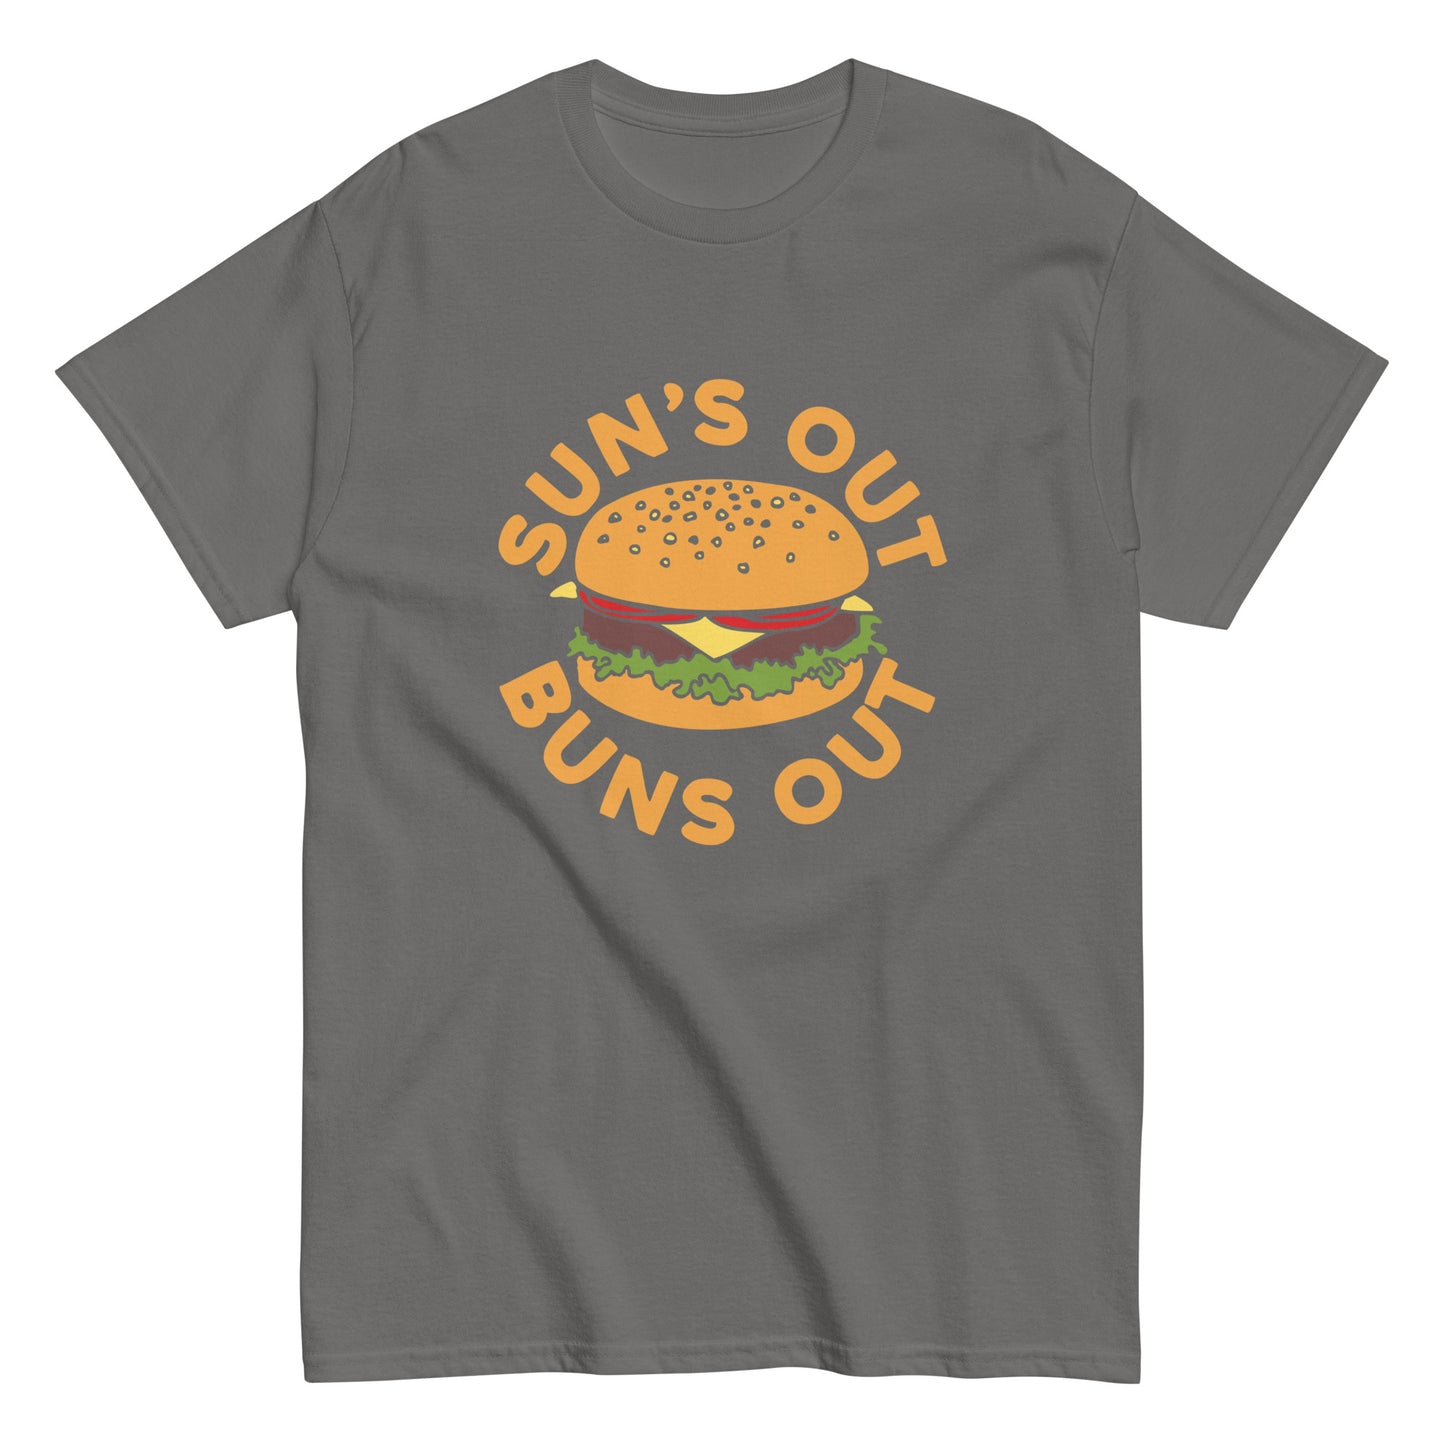 Sun's Out Buns Out Men's Classic Tee